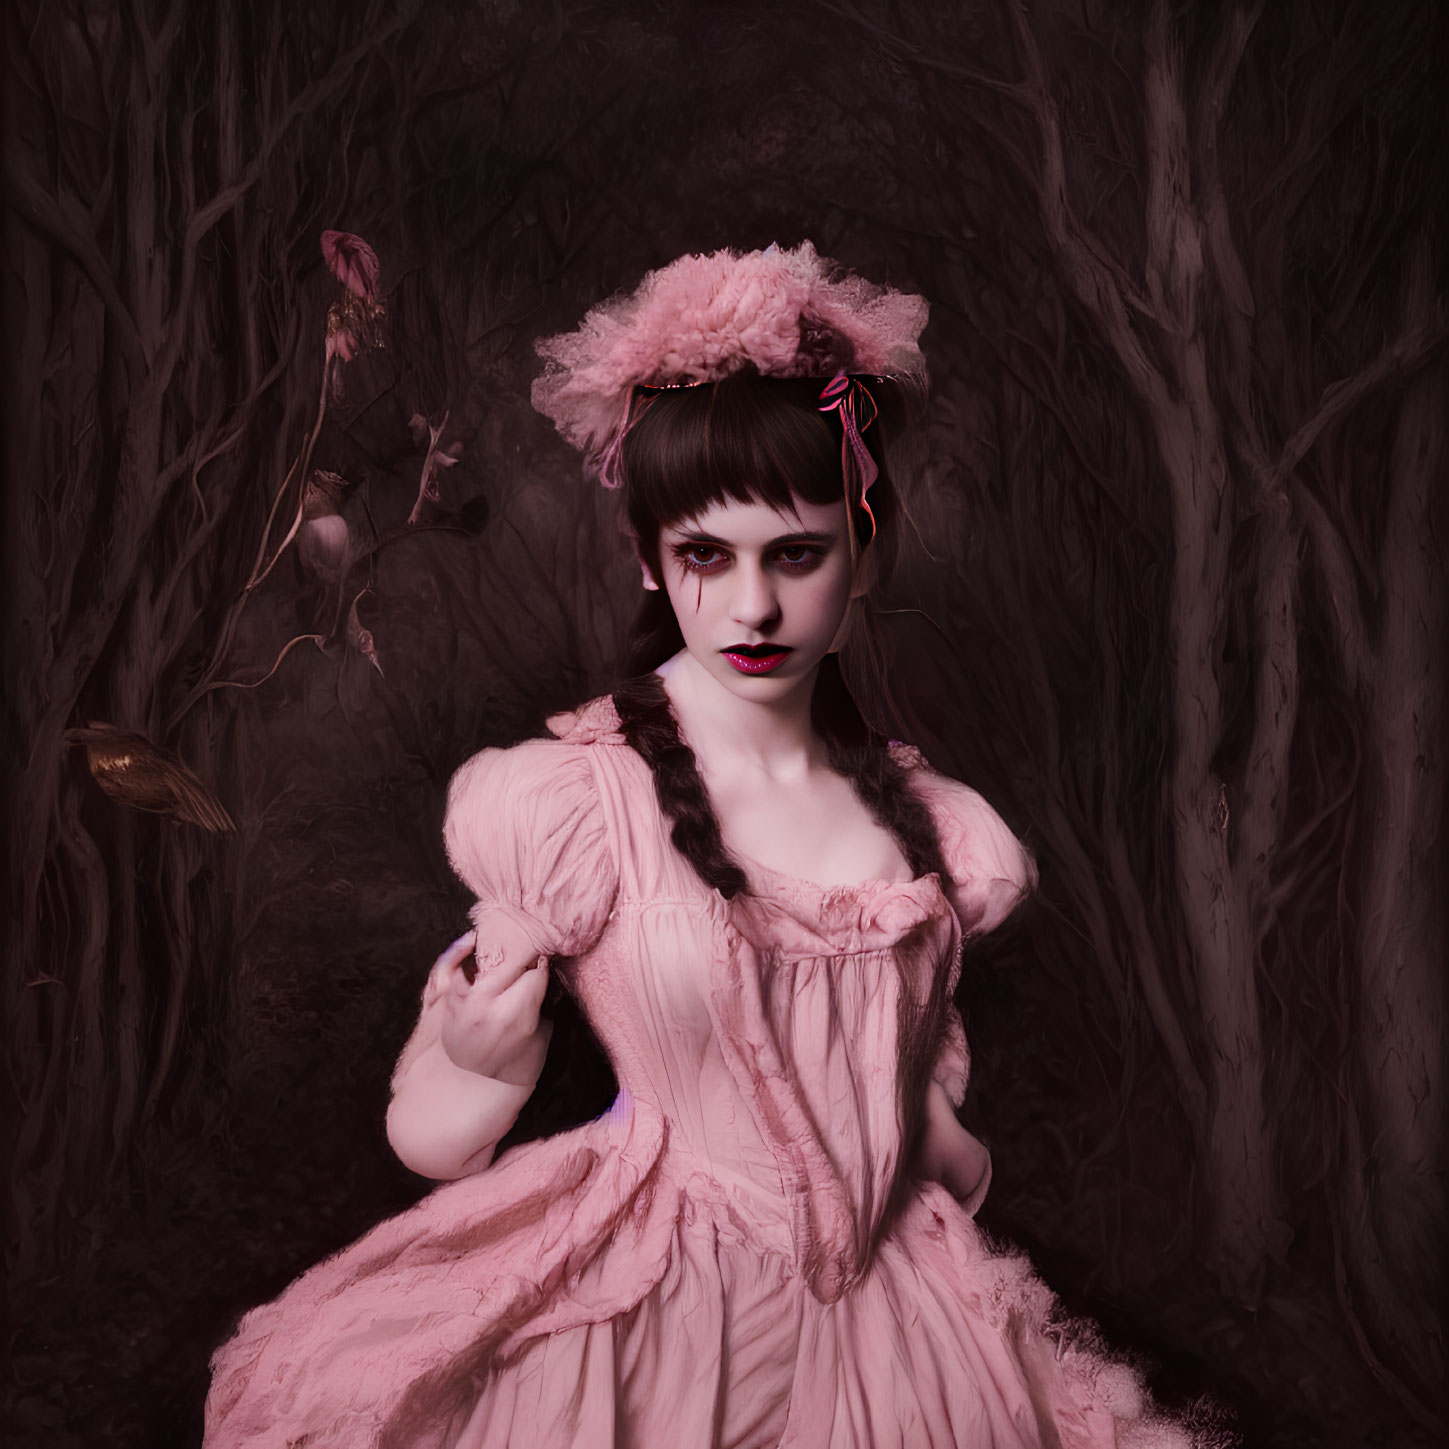 Woman in Vintage Pink Dress and Bonnet in Dark Forest with Feather